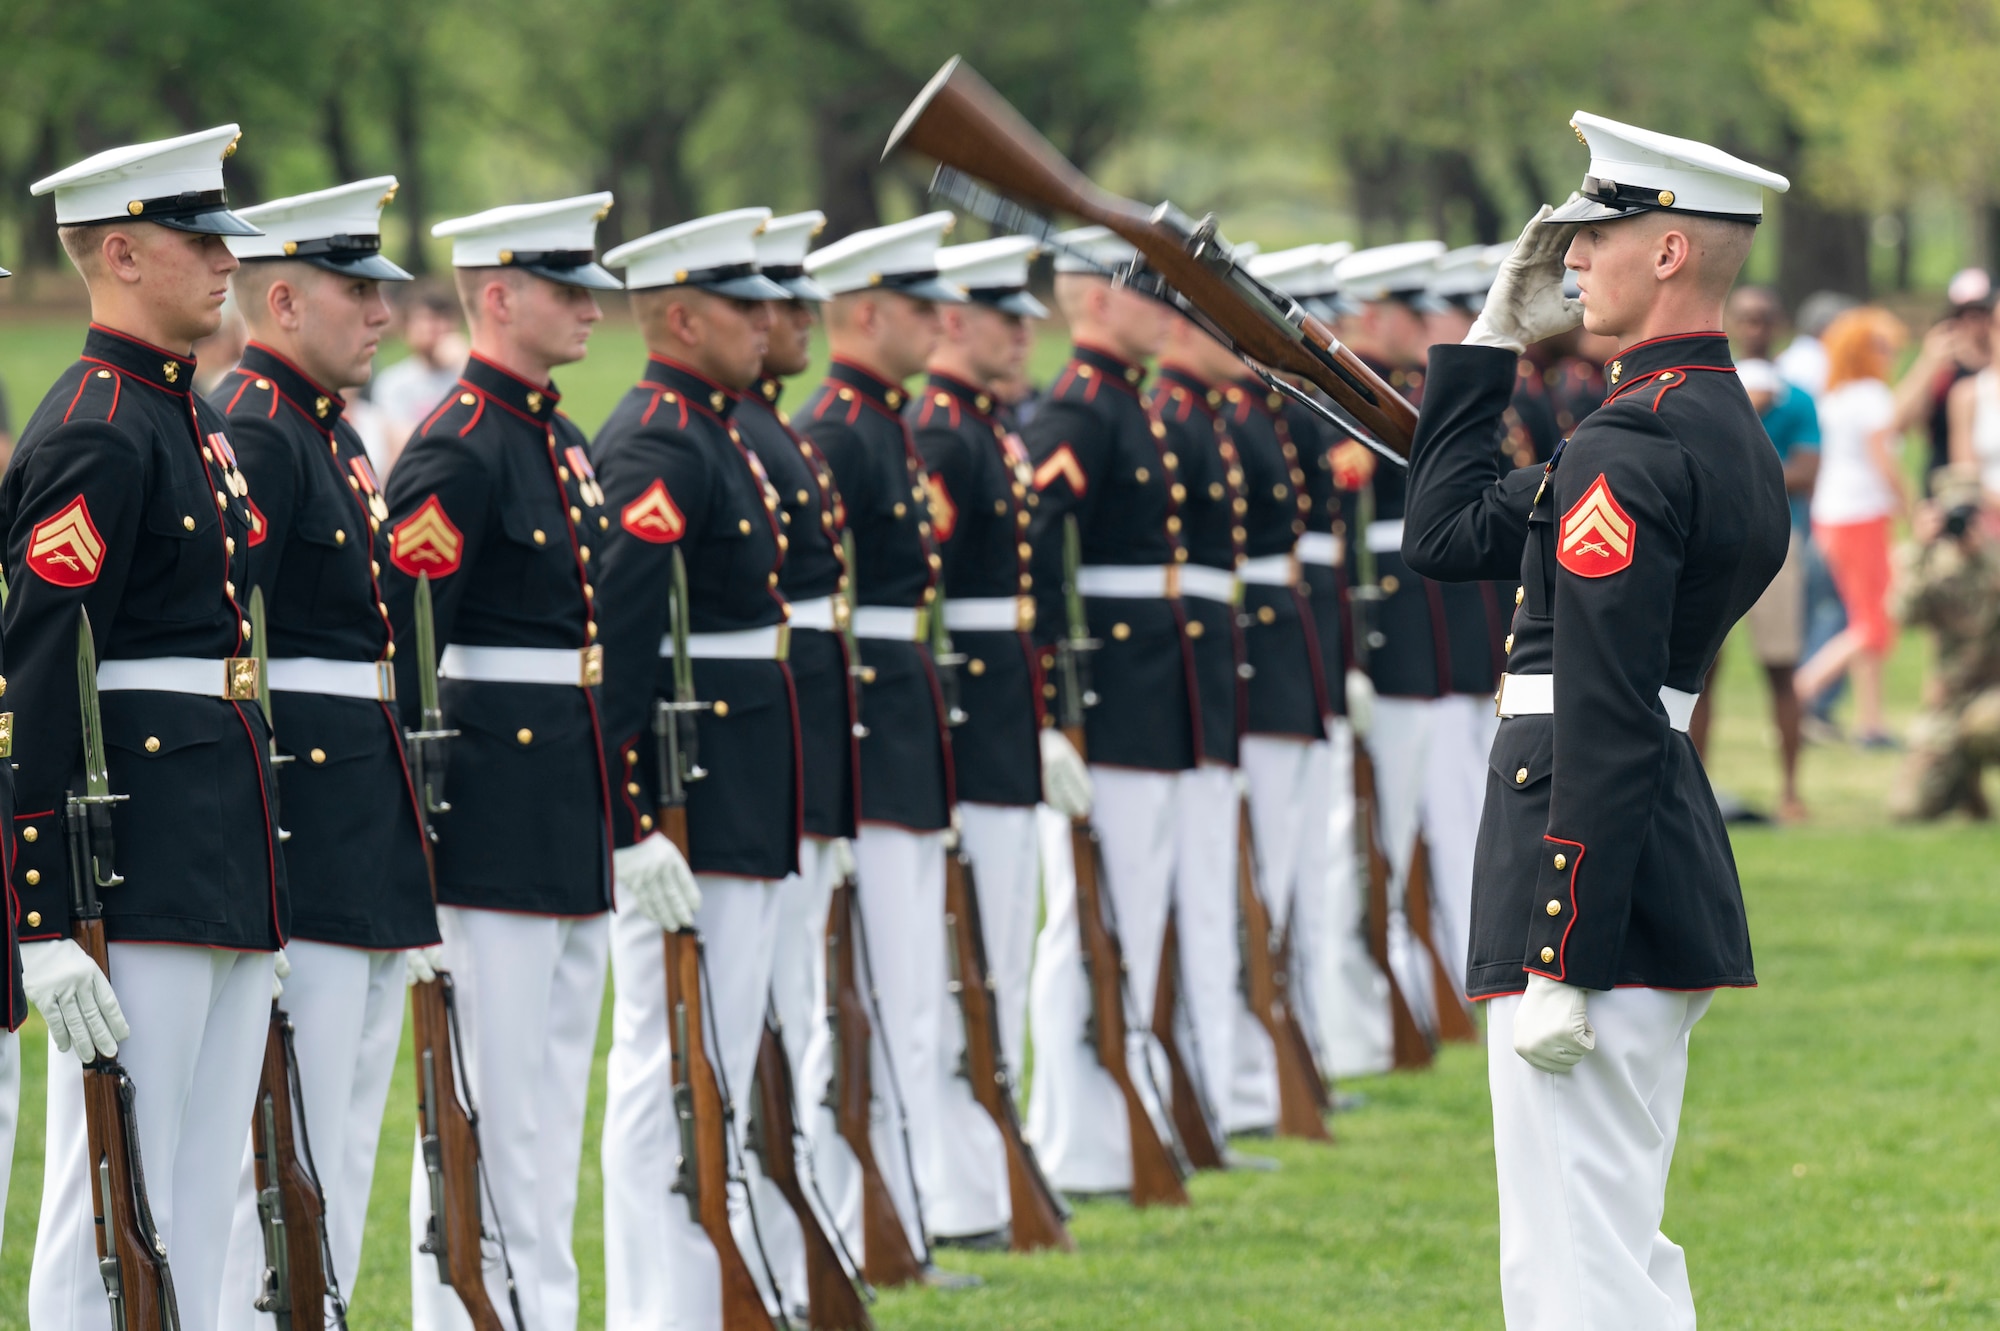 The U.S. Marine Corps Silent Drill Platoon performs during a Joint Services Drill Exhibition April 14, 2023, at the Washington Monument in Washington, D.C. All five U.S. military drill teams displayed technical skill and teamwork while challenging the other branches for the first-place trophy in this friendly competition. (U.S. Air Force photo by Jason Treffry)